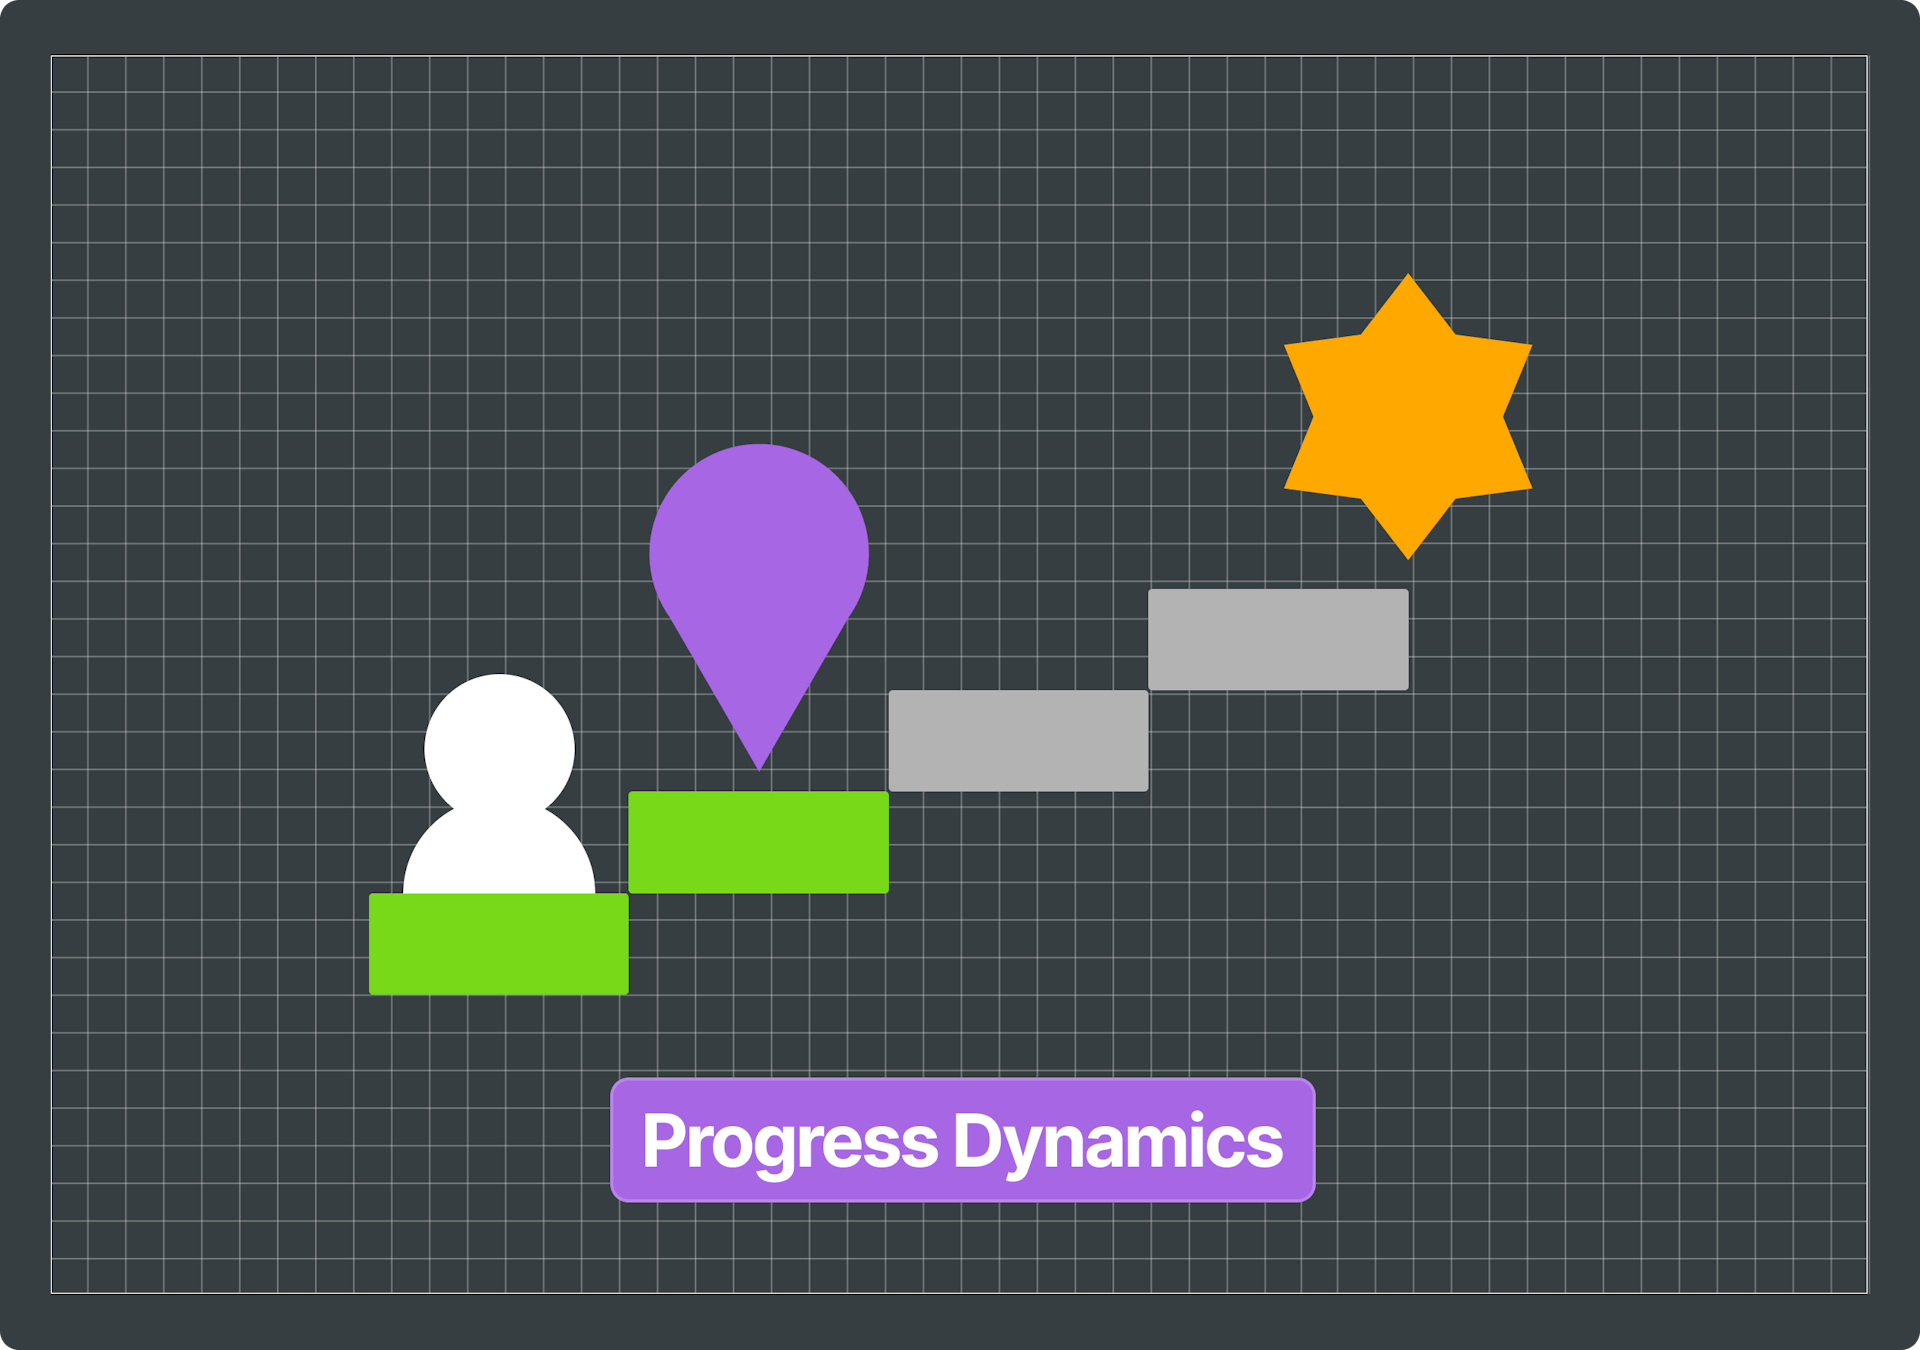 Illustration of a ladder, a character and a star that represents user progression from start to success. Includes text that says Progress Dynamics.